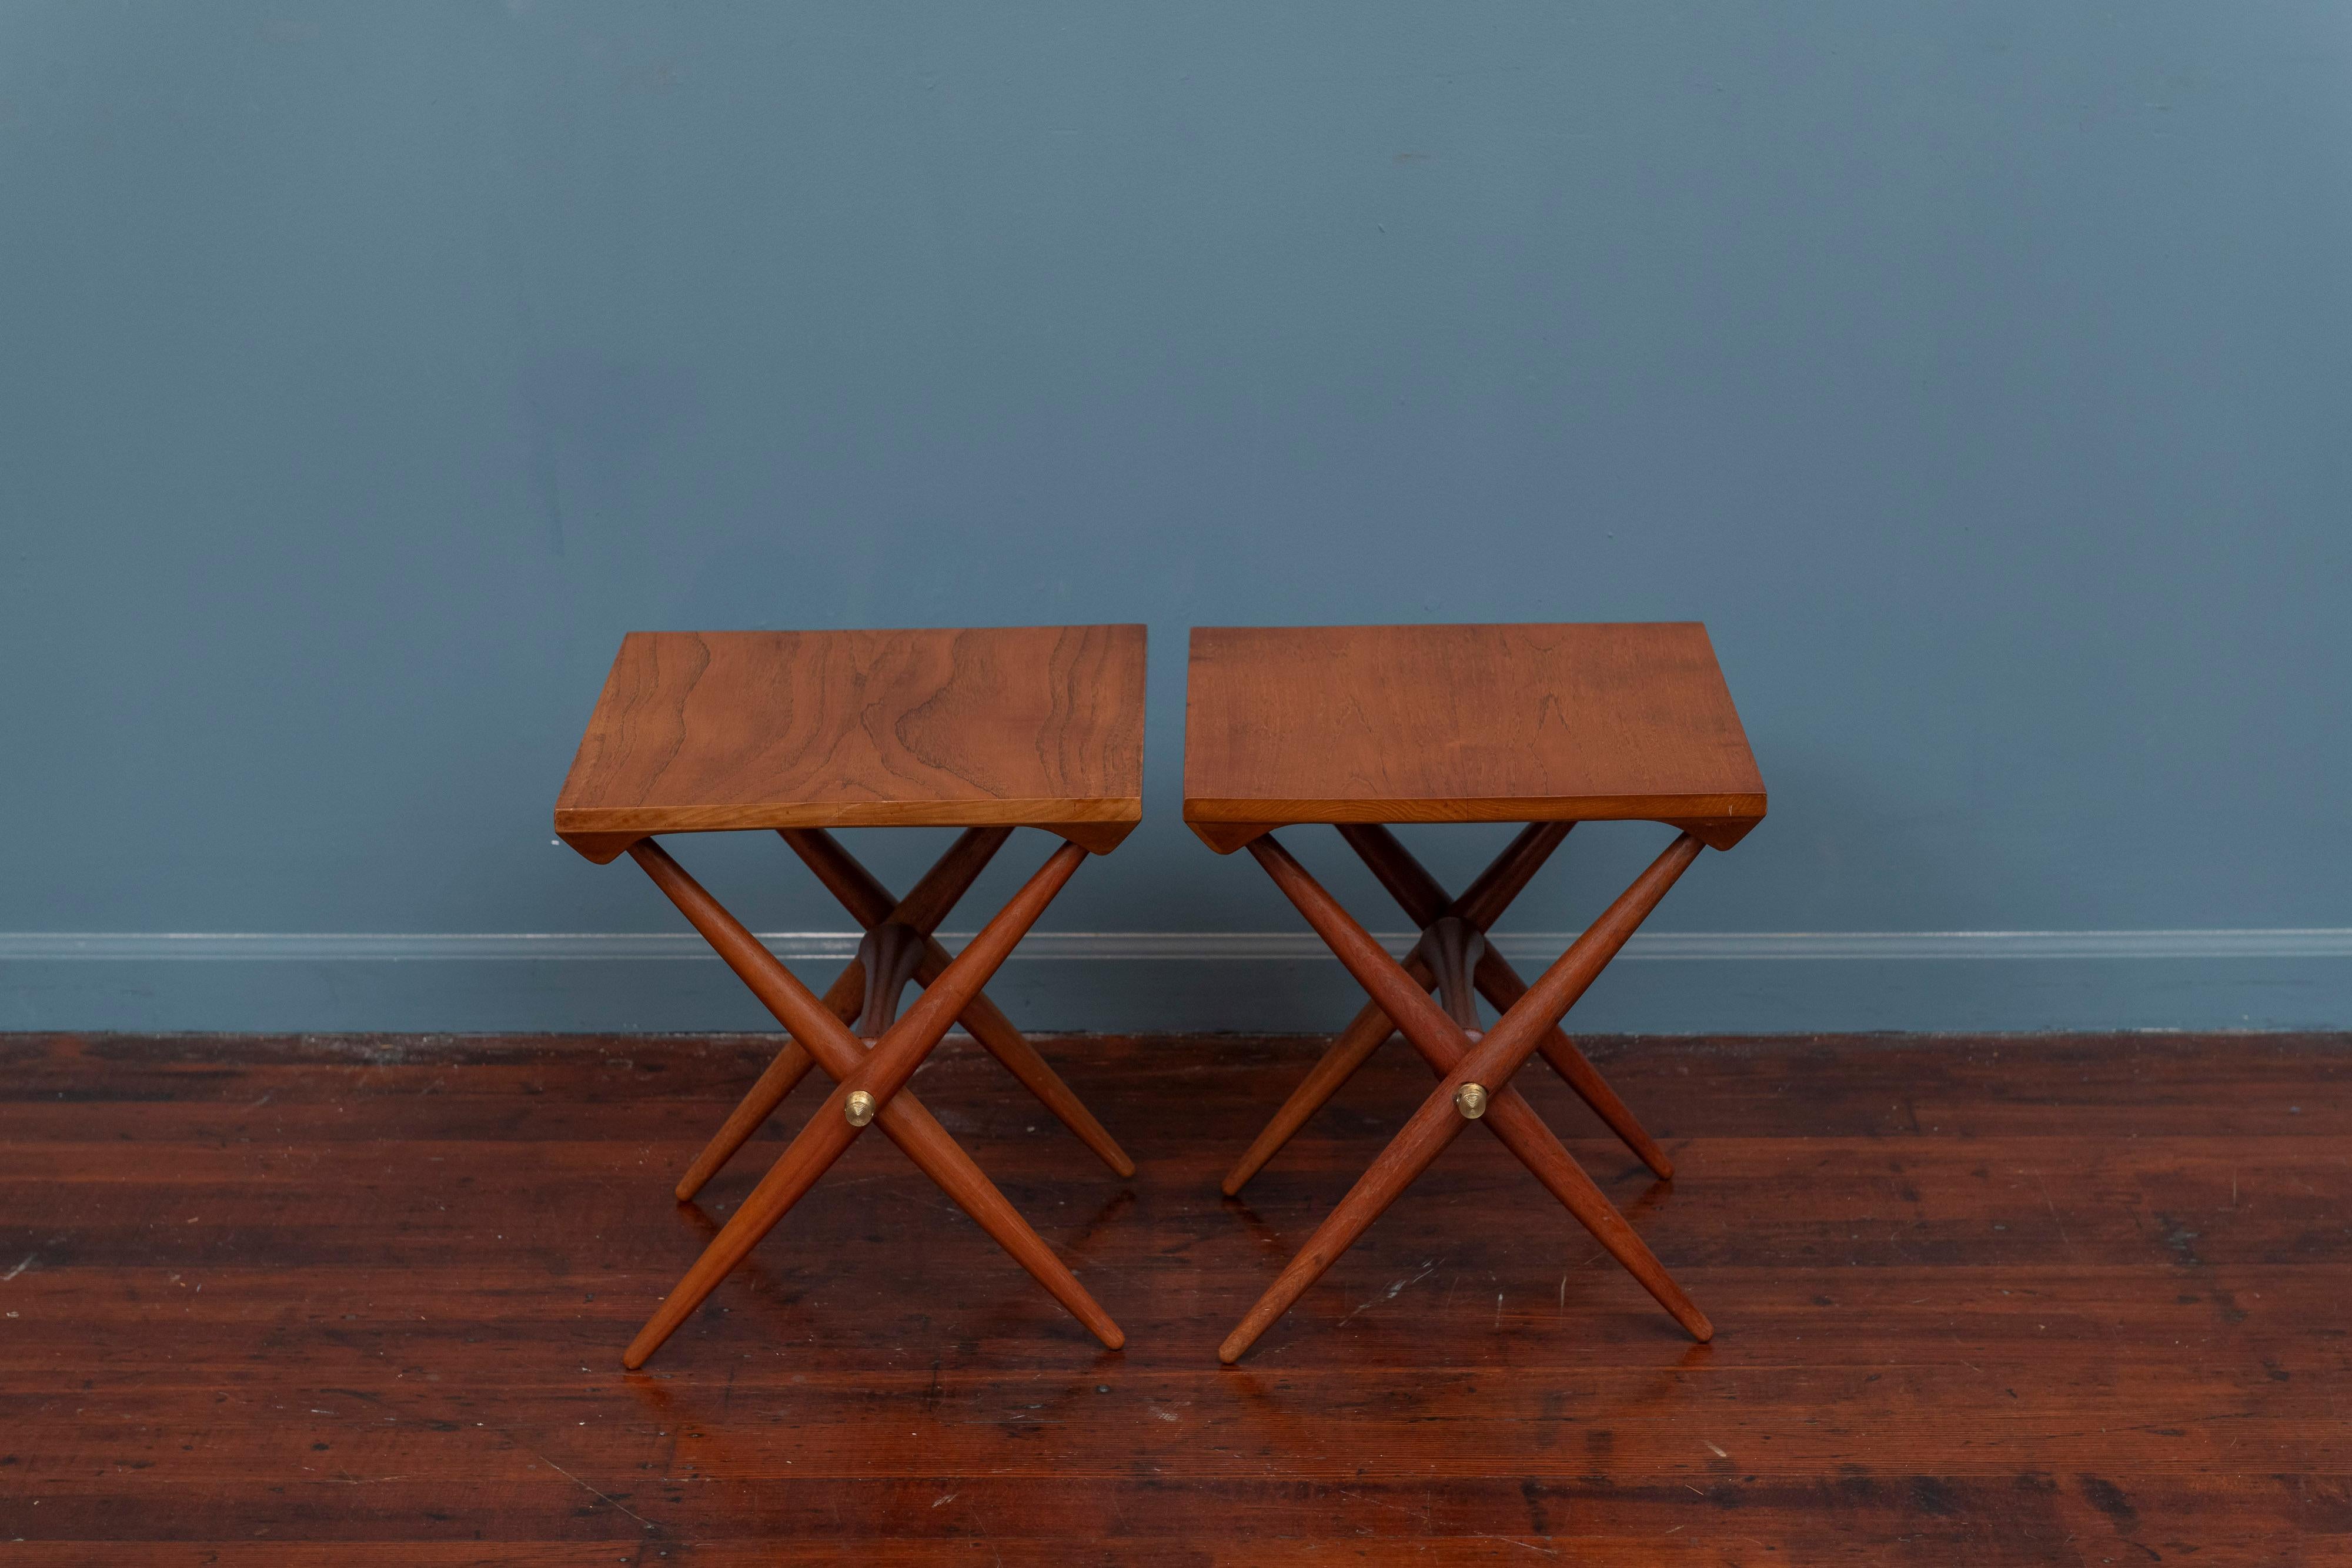 Jens Quistgaard design x-base side tables with brass metal mounts. High quality construction and attention to detail, rare to find a matched pair.
Newly refinished and ready to install and enjoy.